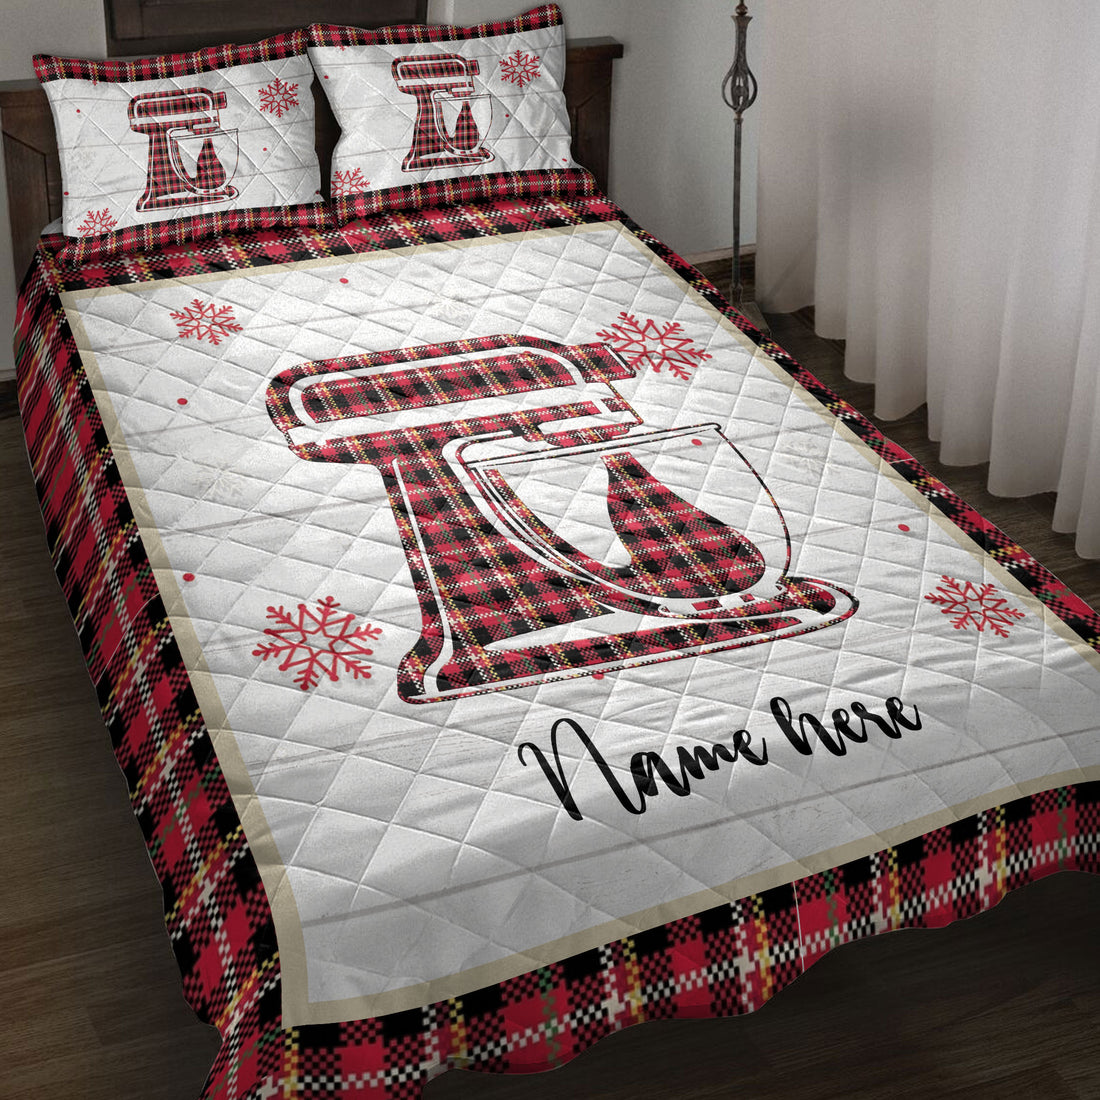 Ohaprints-Quilt-Bed-Set-Pillowcase-Christmas-Baking-Mixer-Snowflake-Red-Plaid-Custom-Personalized-Name-Blanket-Bedspread-Bedding-4252-Throw (55'' x 60'')